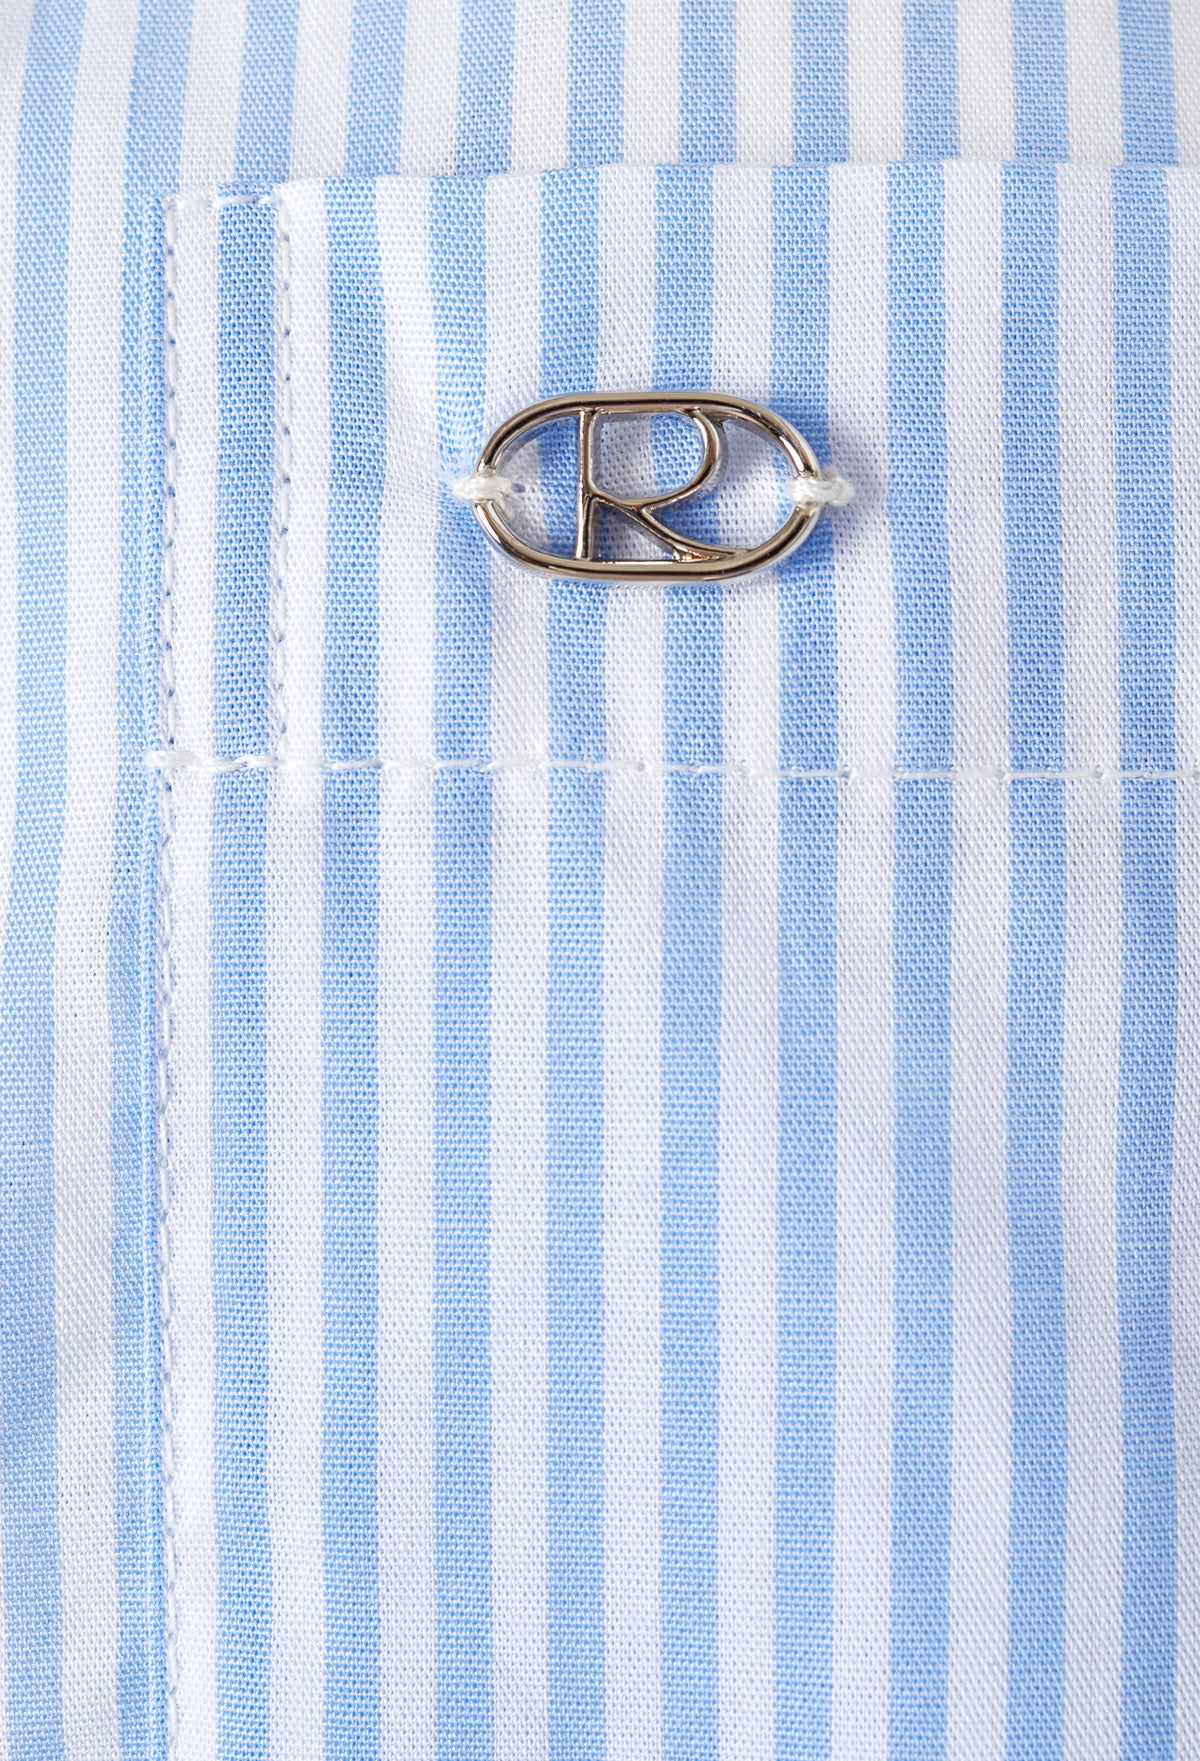 Striped Contrast Shirt In Blue (Long)